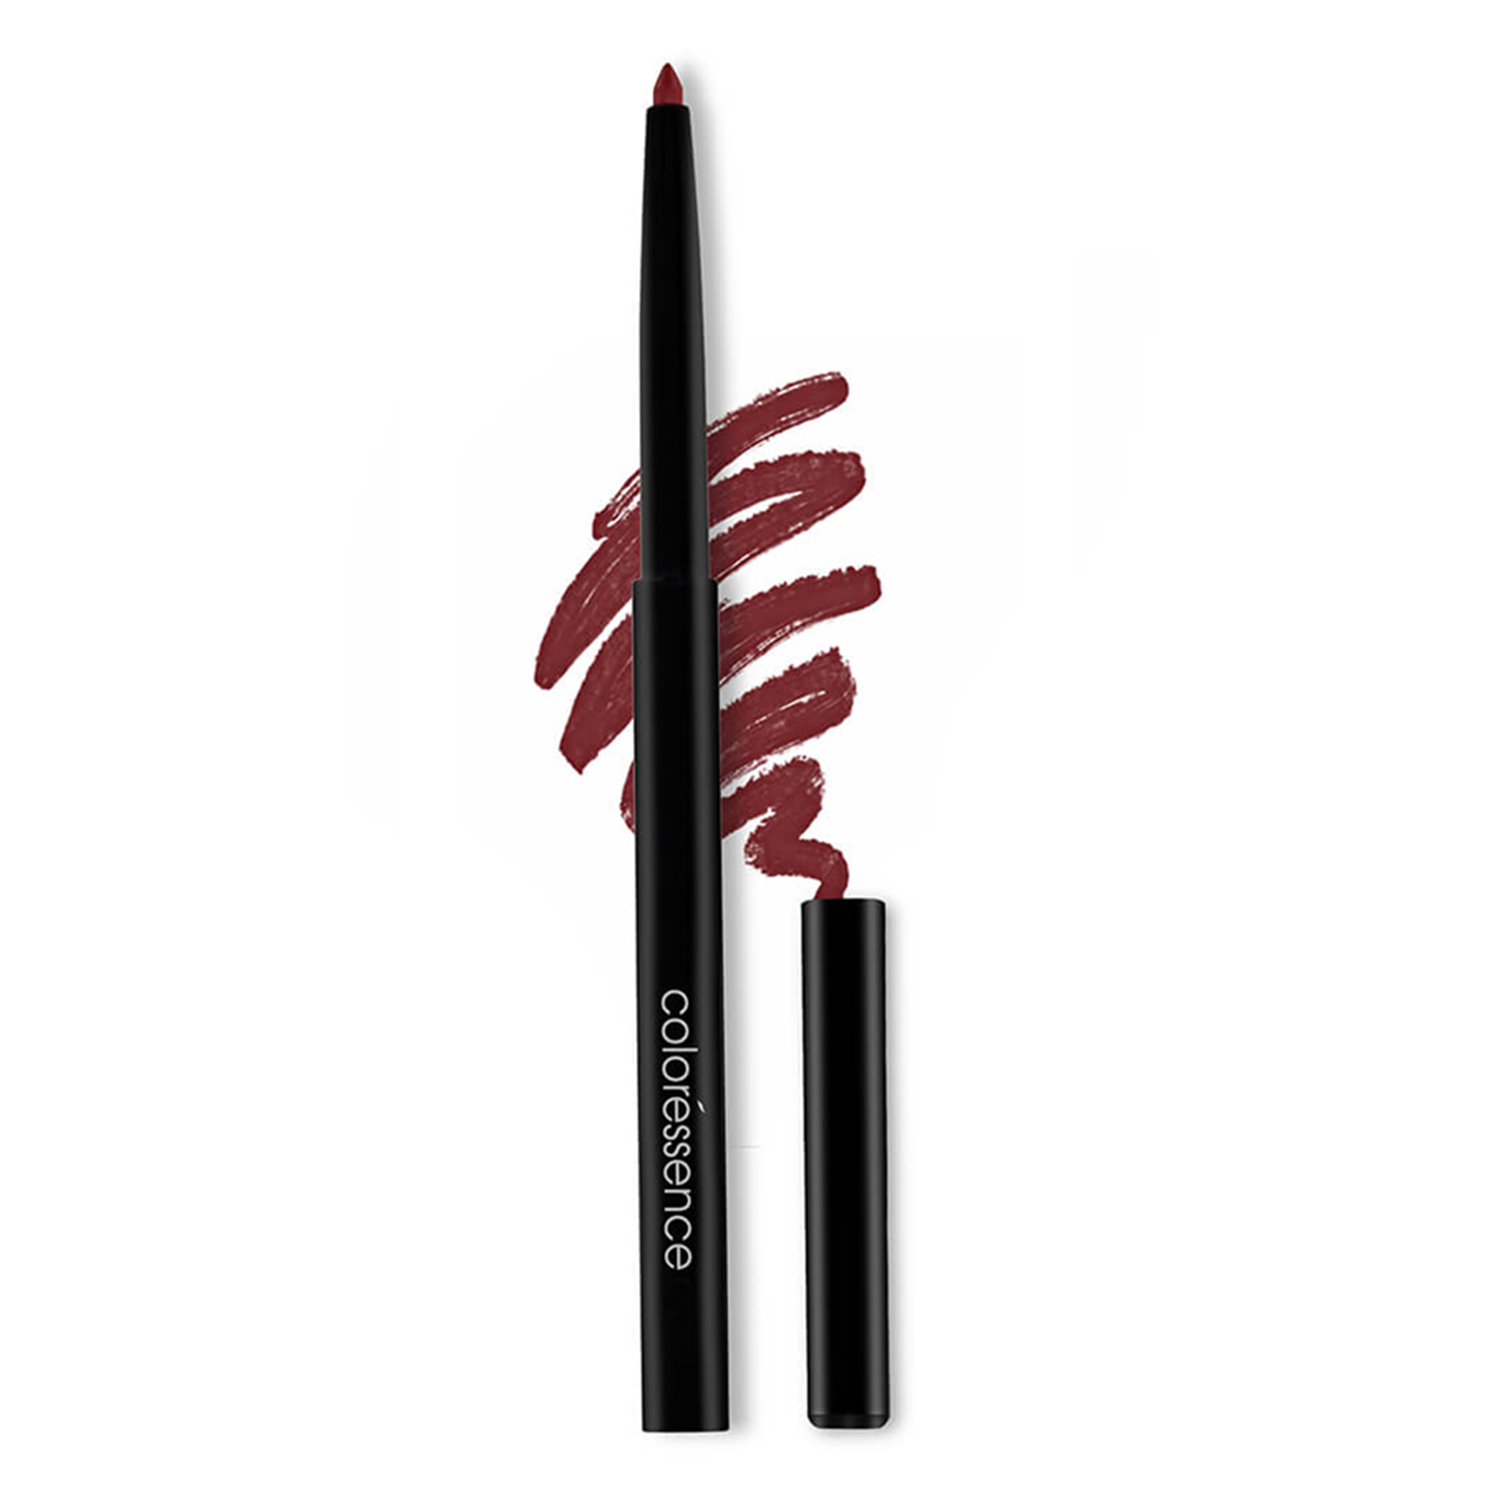 Coloressence Long Stay Smudge Free Water Proof Creamy Definer Lip Liner Pencil, Glossy Finish, 0.25gm-01 Rust